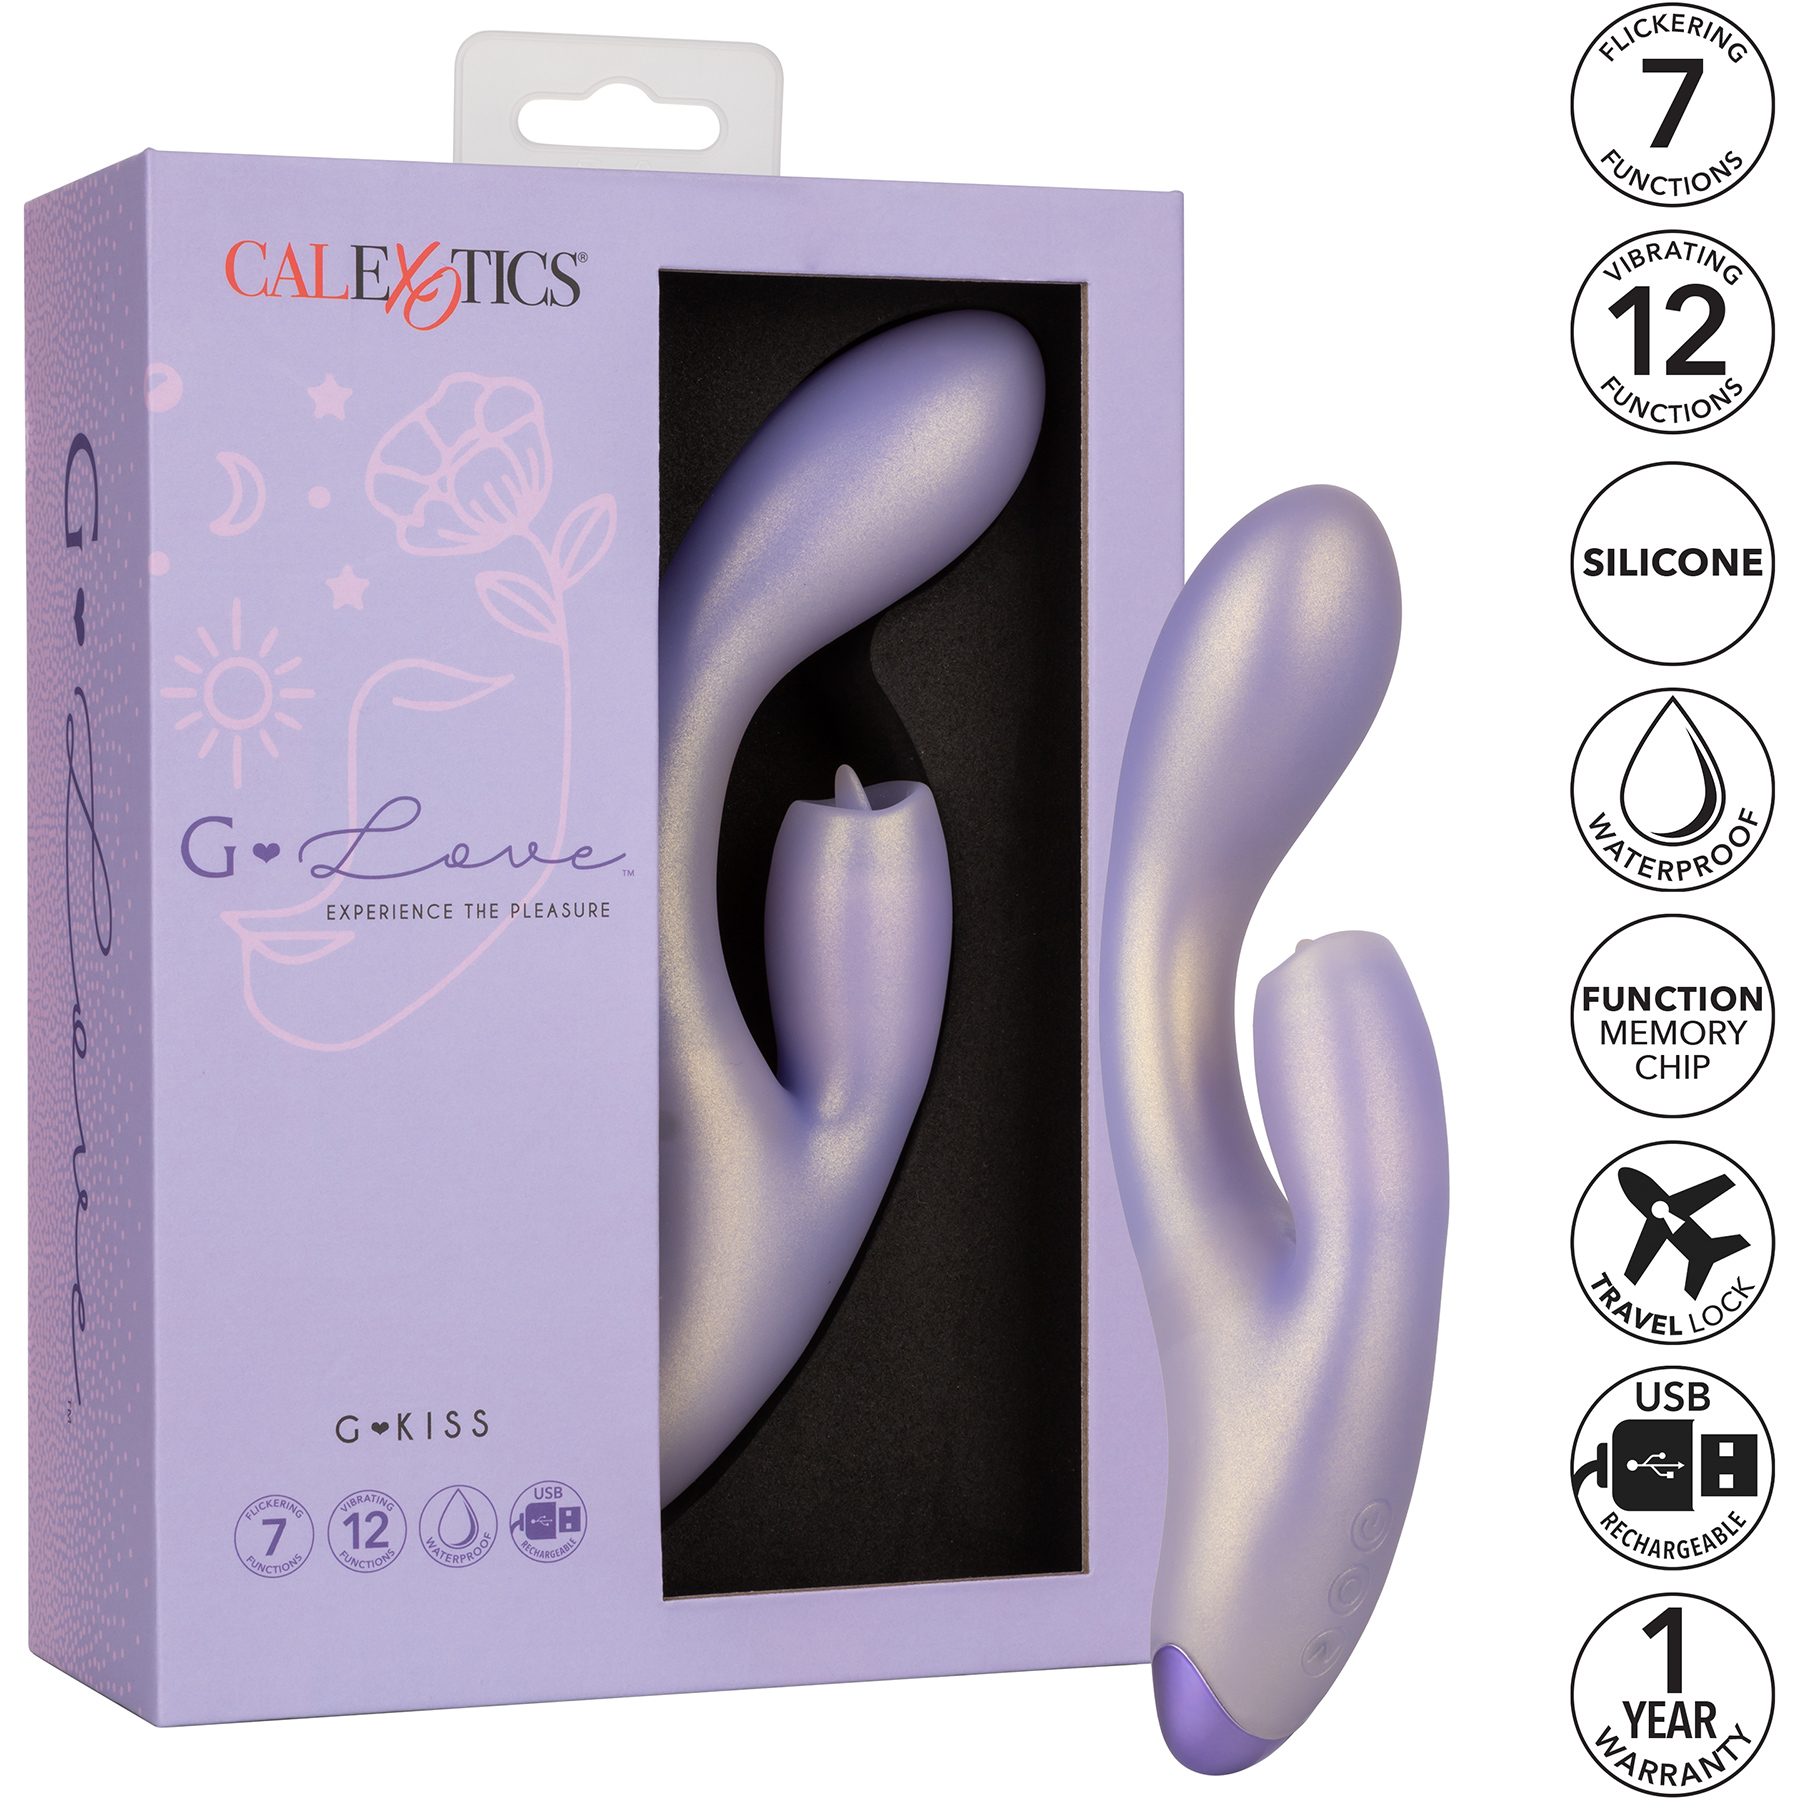 G-Love G-Kiss Silicone Rechargeable Waterproof Dual Stimulation Vibrator By CalExotics - Features